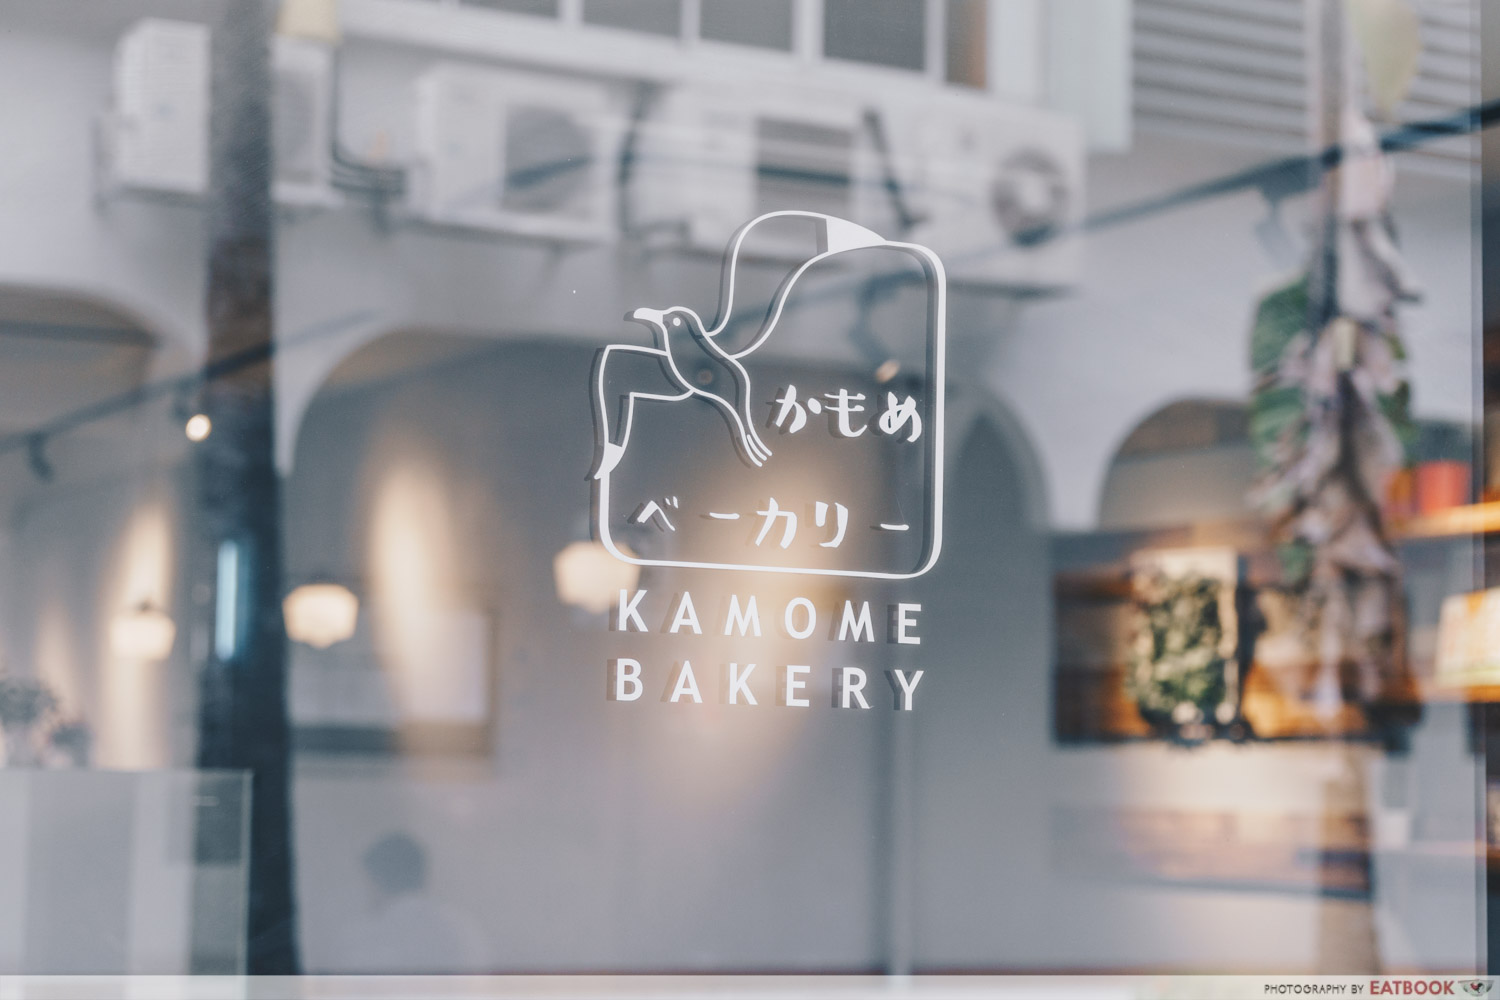 Kamome Bakery - Conclusion